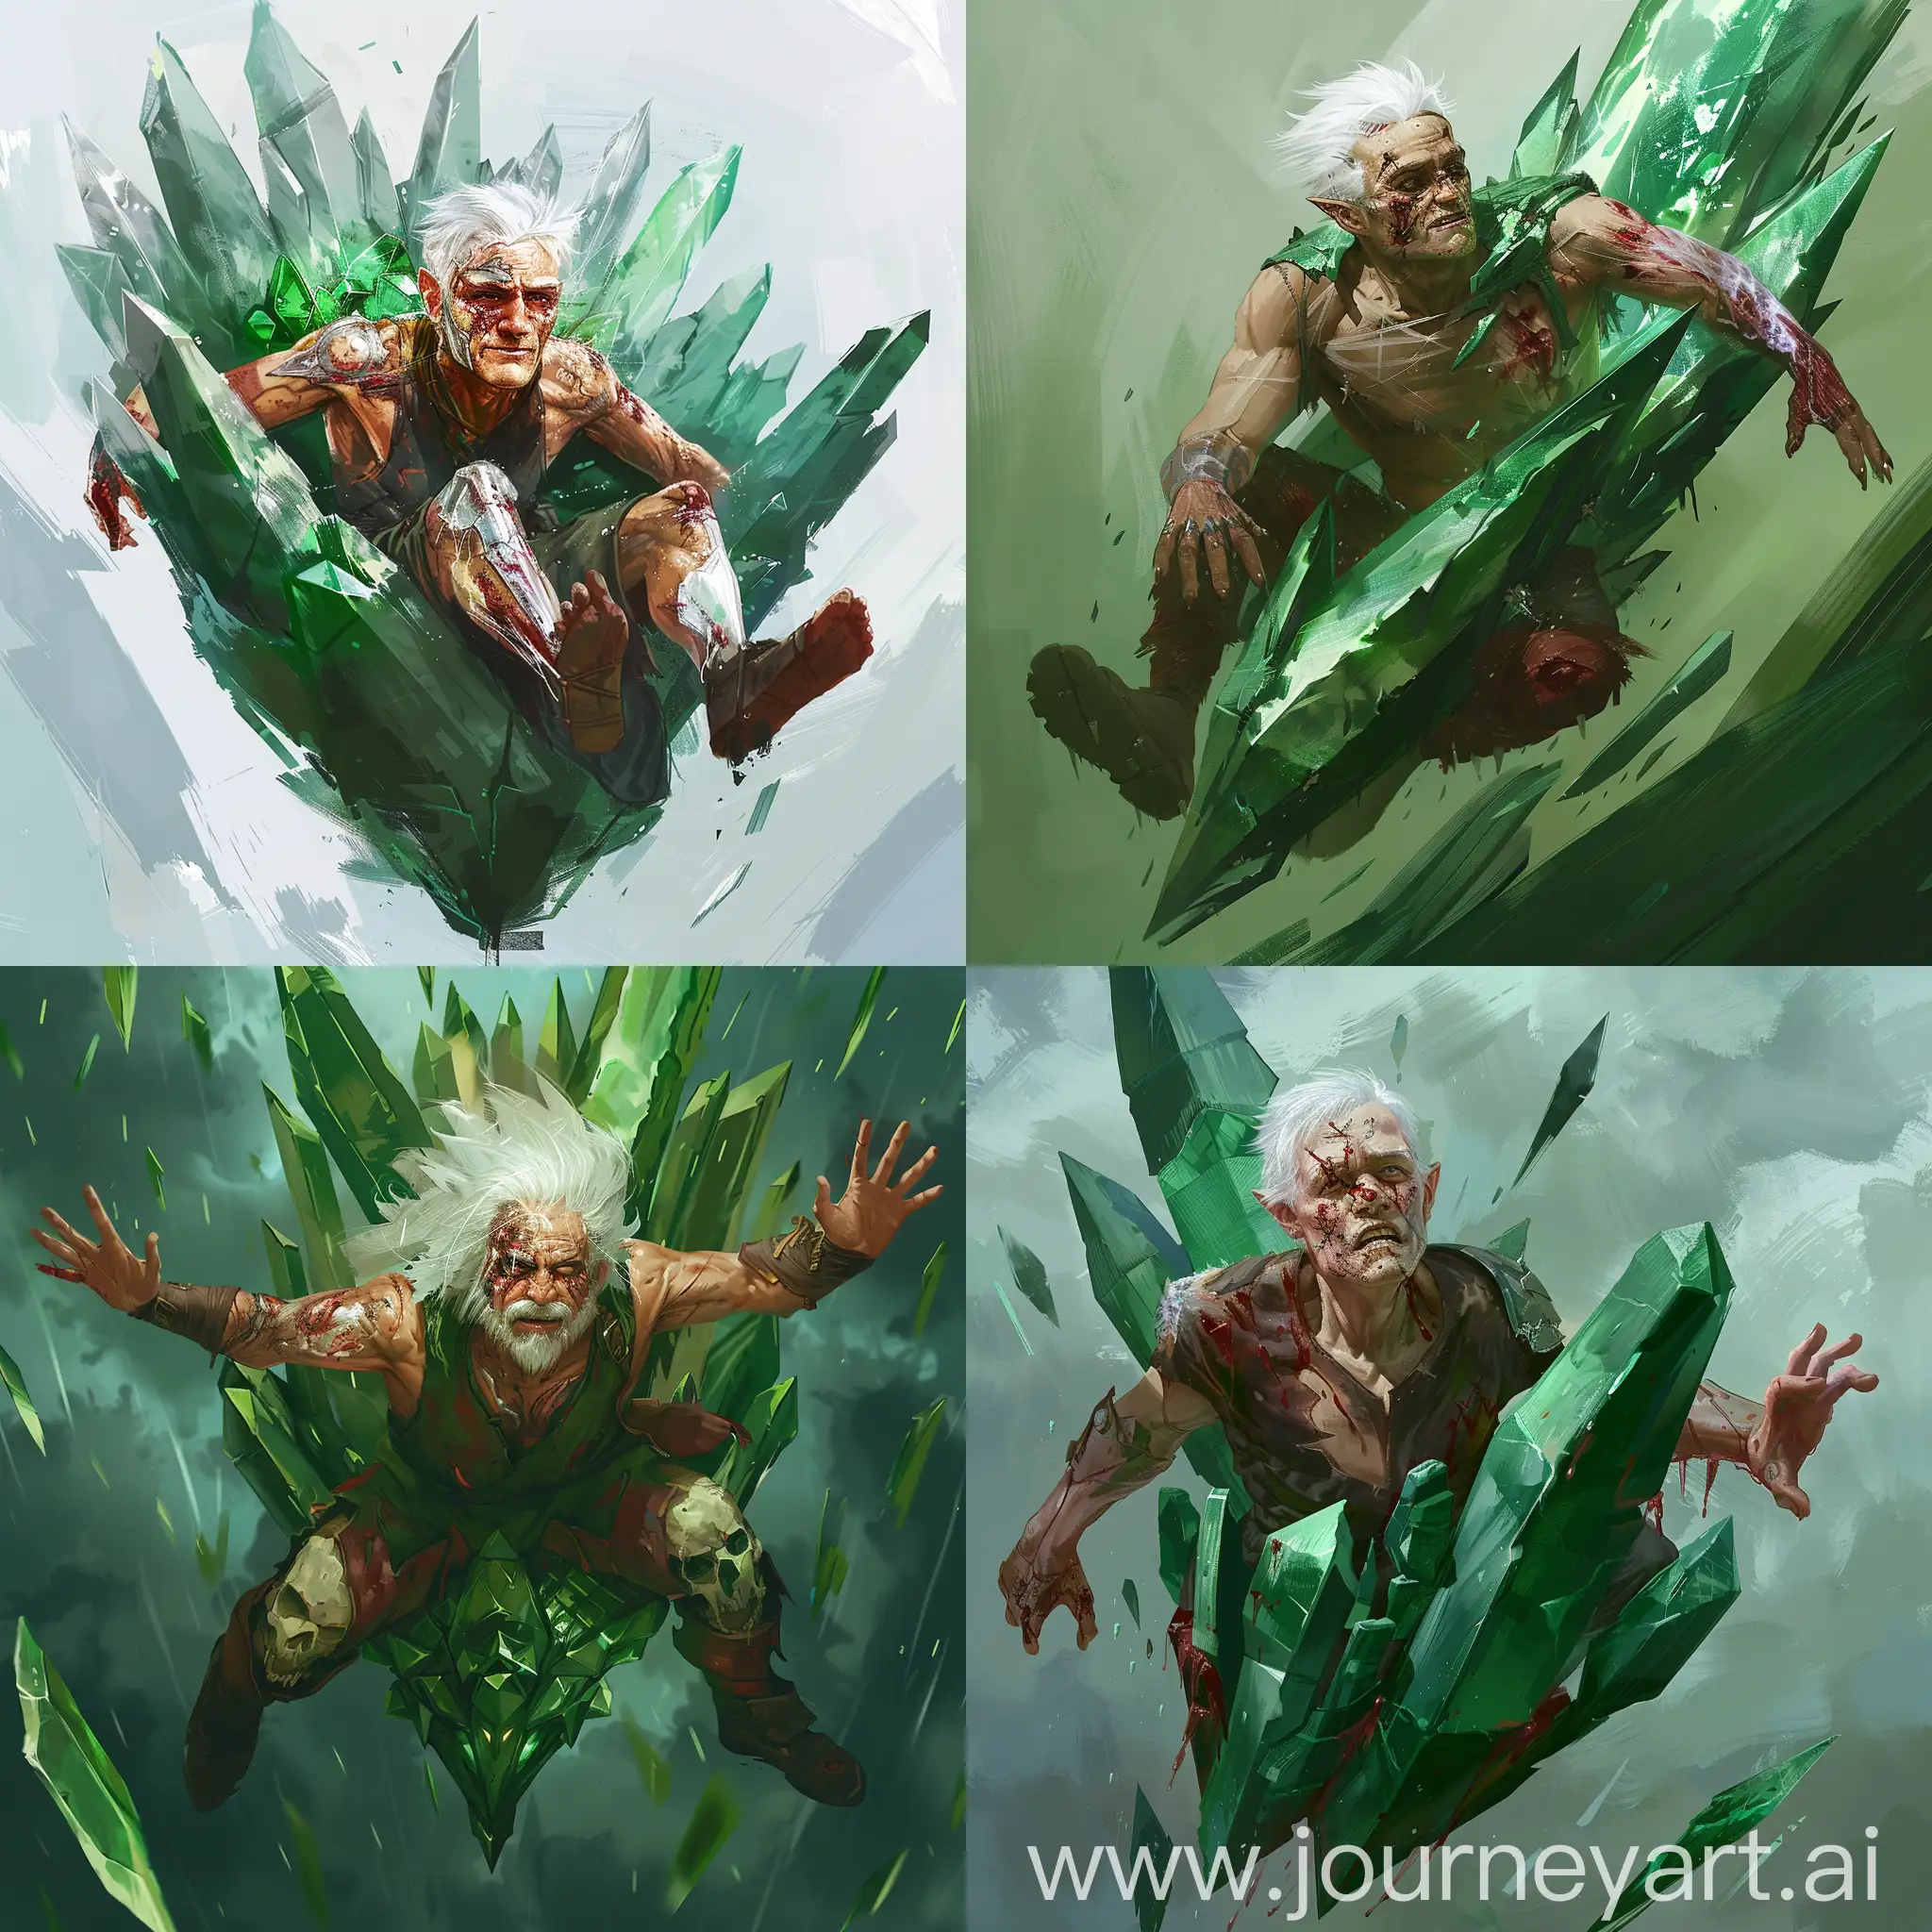 a mage class, middle aged, has injuries on his face and body, white hair, no beard, male, flying on a green crystal flying throne,full body painting, dungeons and dragons artstyle, oil painting, digital painting, brush strokes, fantasy, realism